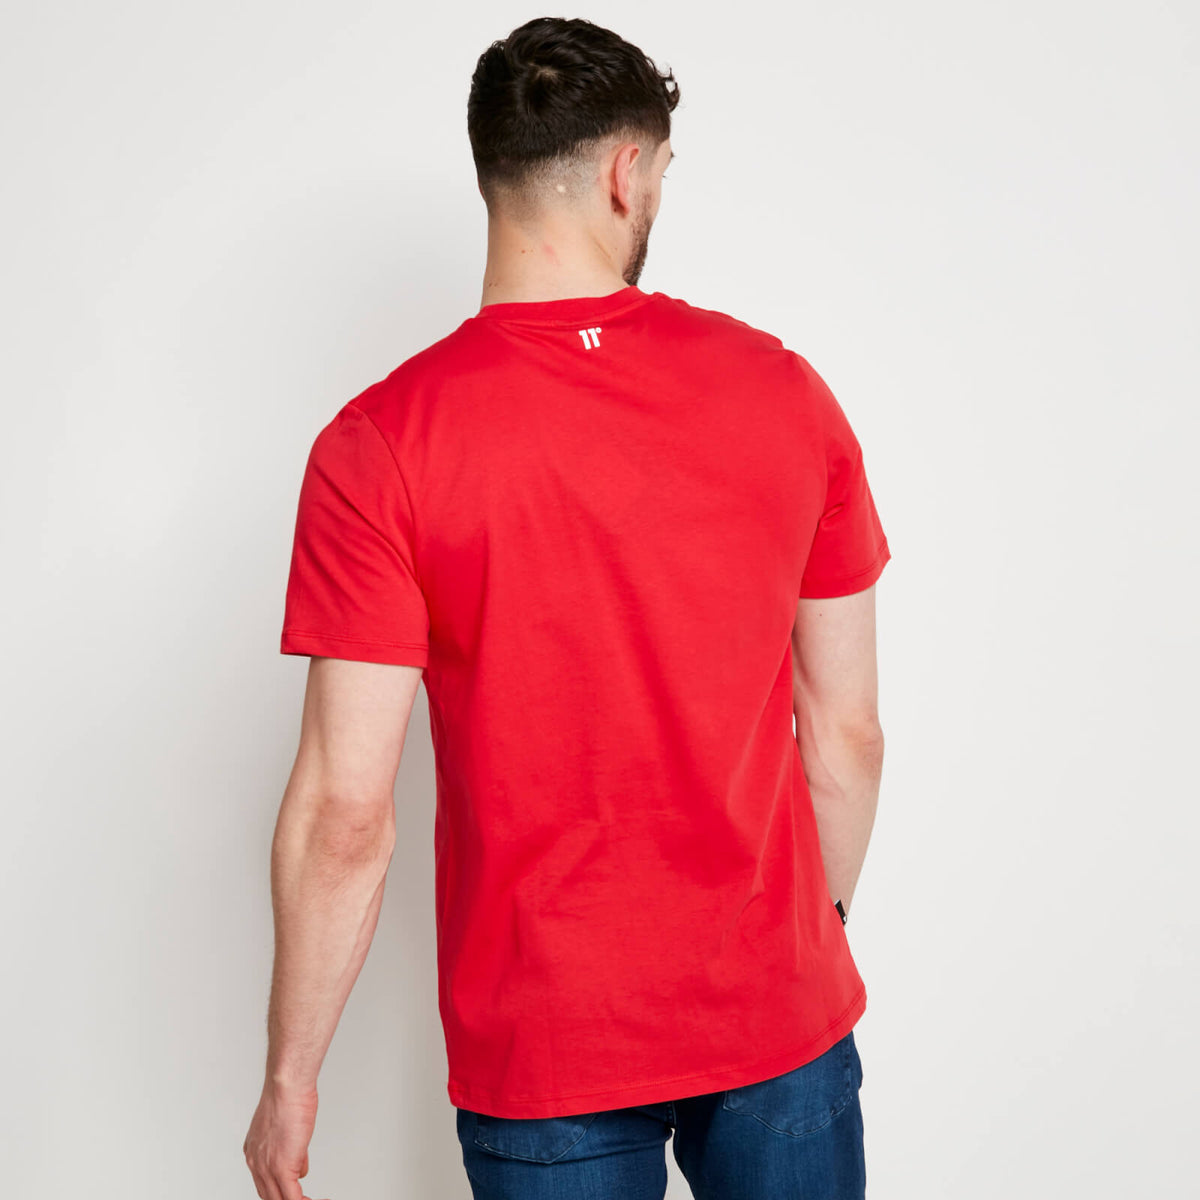 11 Degrees Muscle Fit T-Shirt – Goji Berry Red